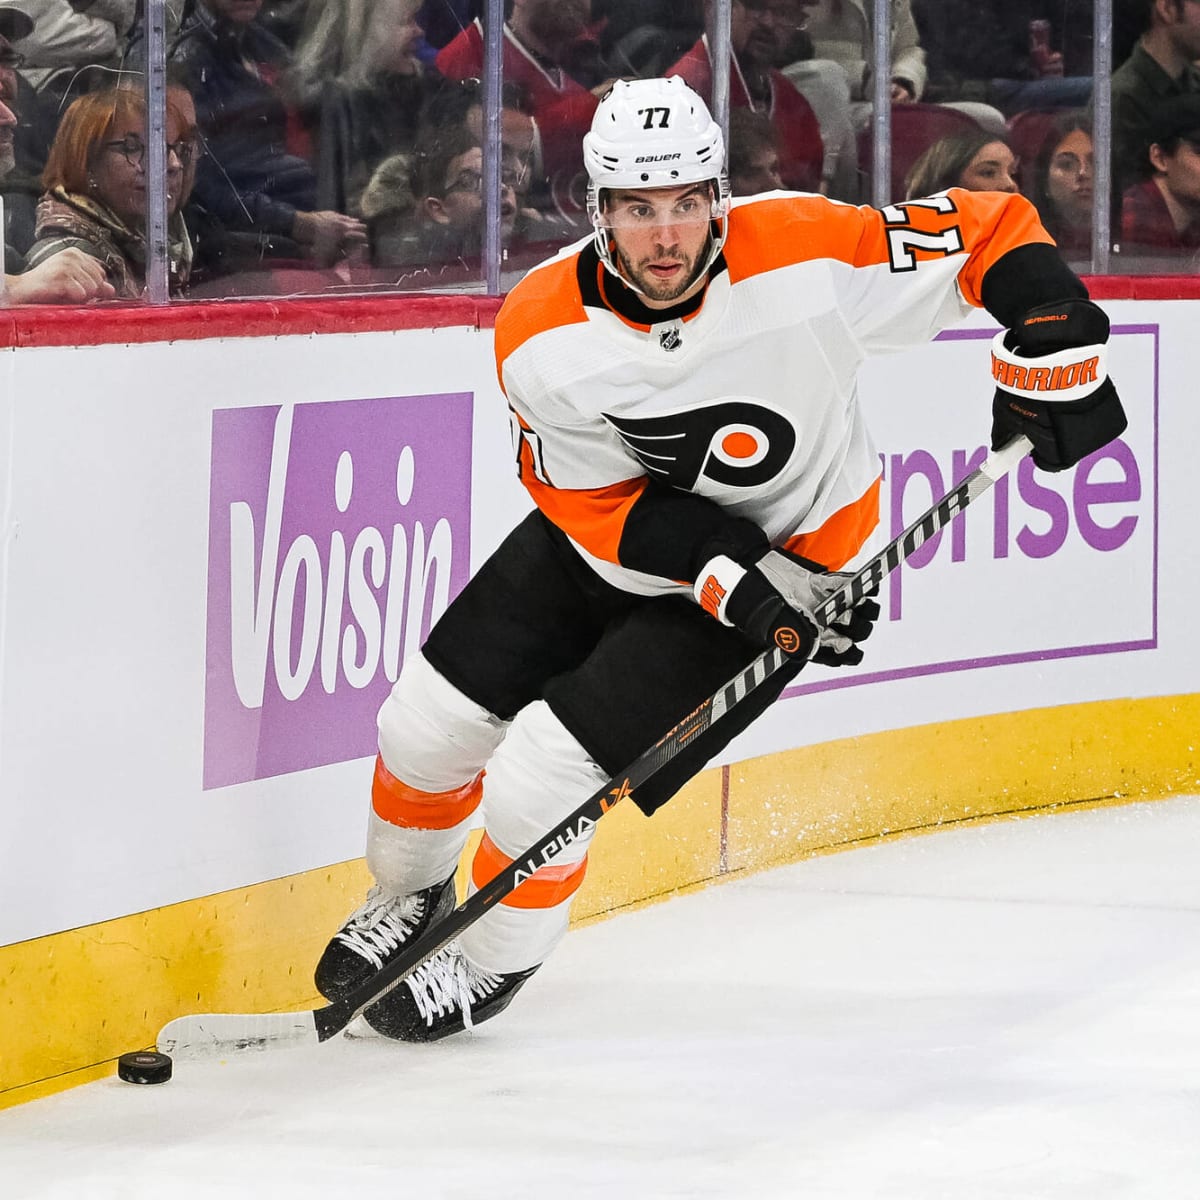 Troubles apparently behind him, Tony DeAngelo comes home to Flyers